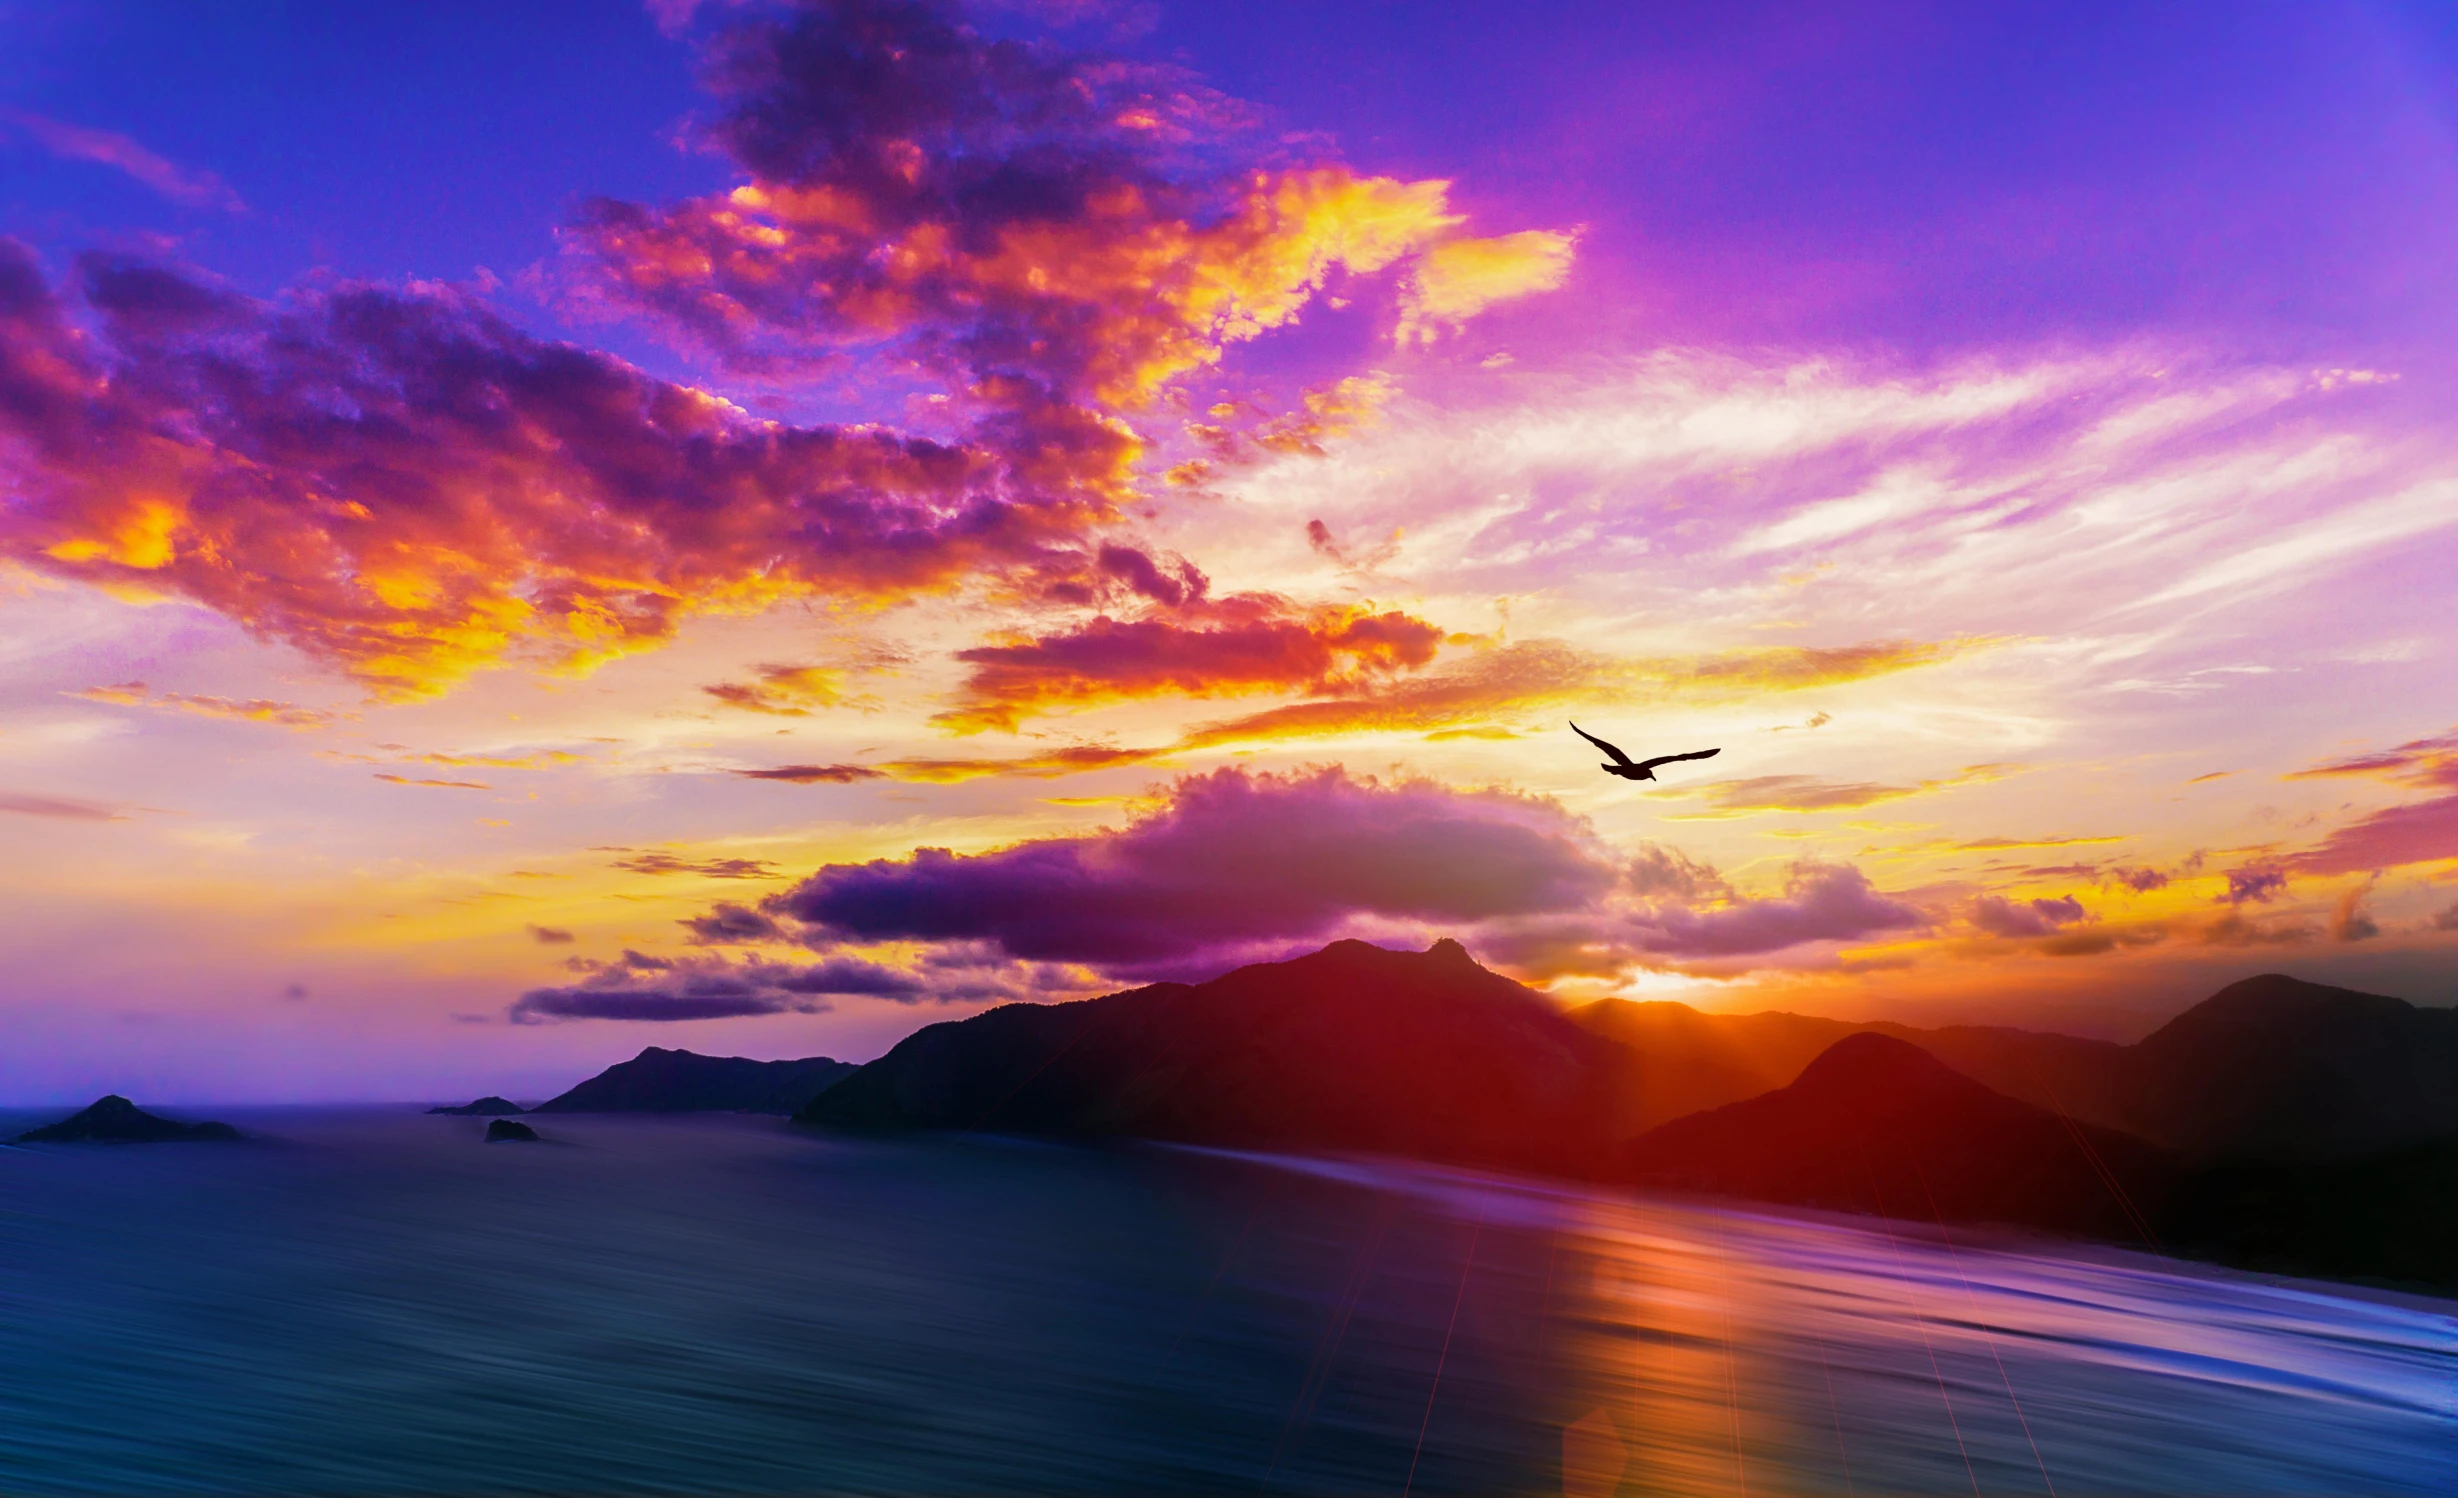 a bird flying over a body of water at sunset, an album cover, pexels contest winner, romanticism, vibrant triadic color scheme, mountains and ocean, violet sky, multicolored